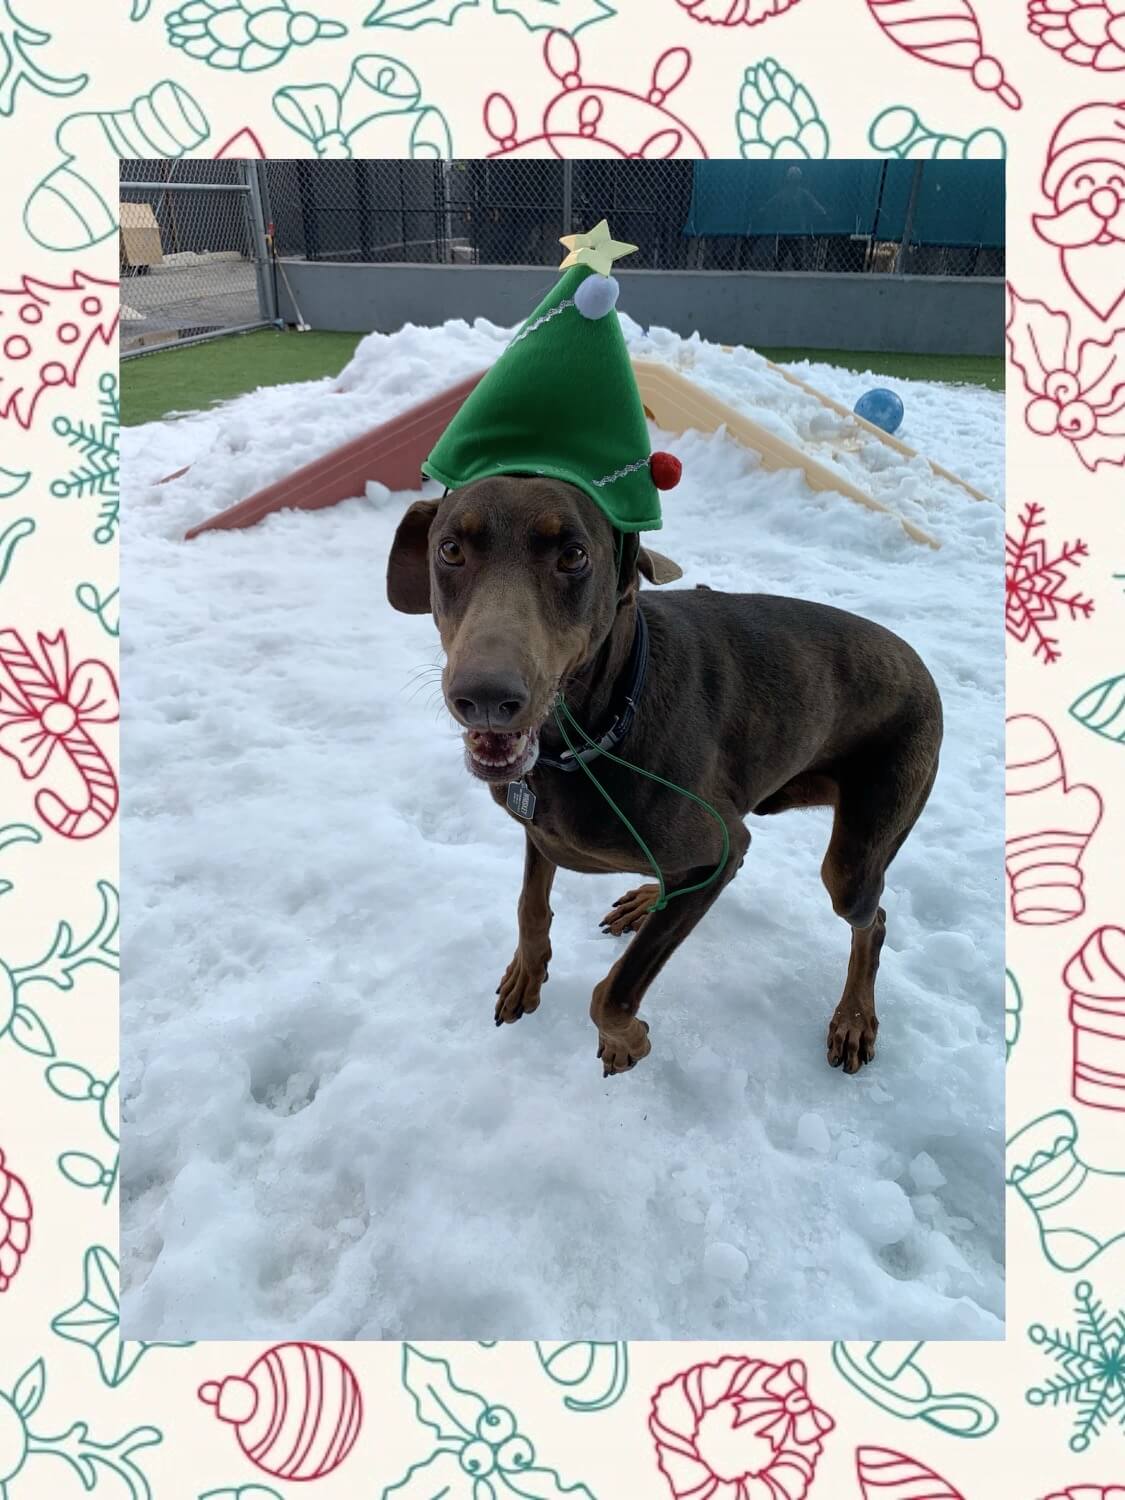 Brown dog with green elf hat on snow in play yard